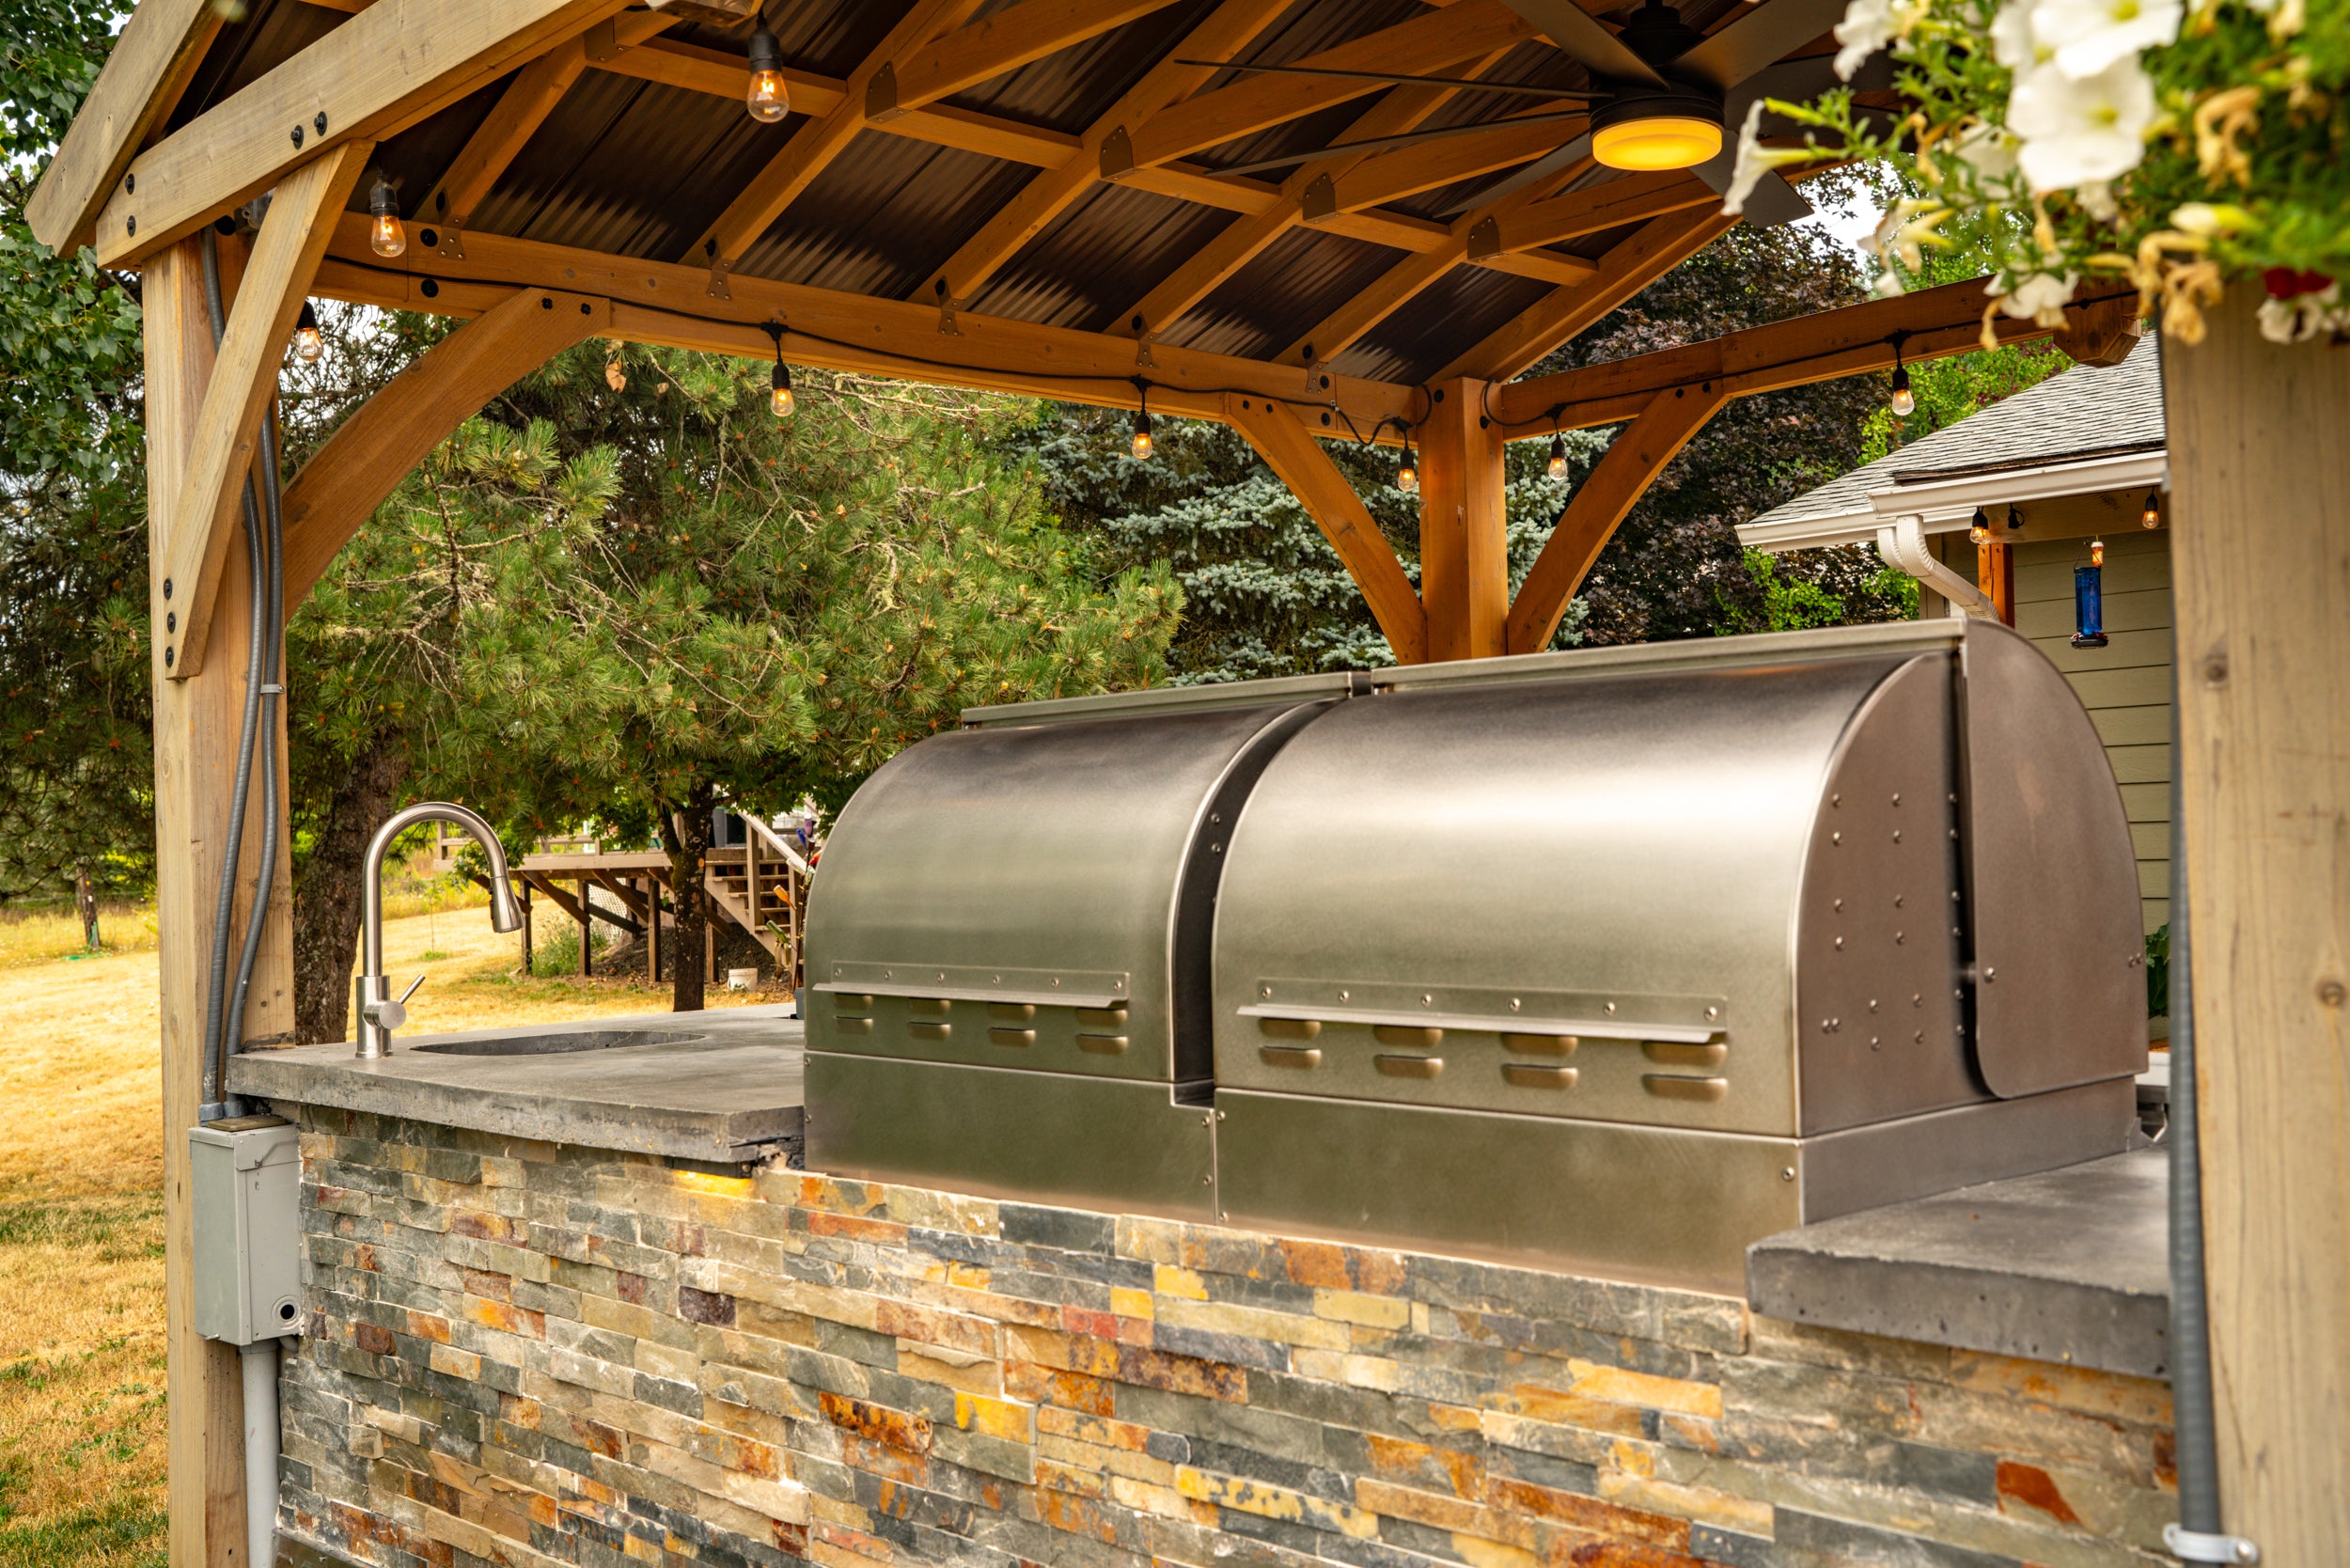 Back view of a MAK Grills pellet smoker and built-in grill in an outdoor kitchen, under a wooden pergola, with a faucet and surrounding greenery.